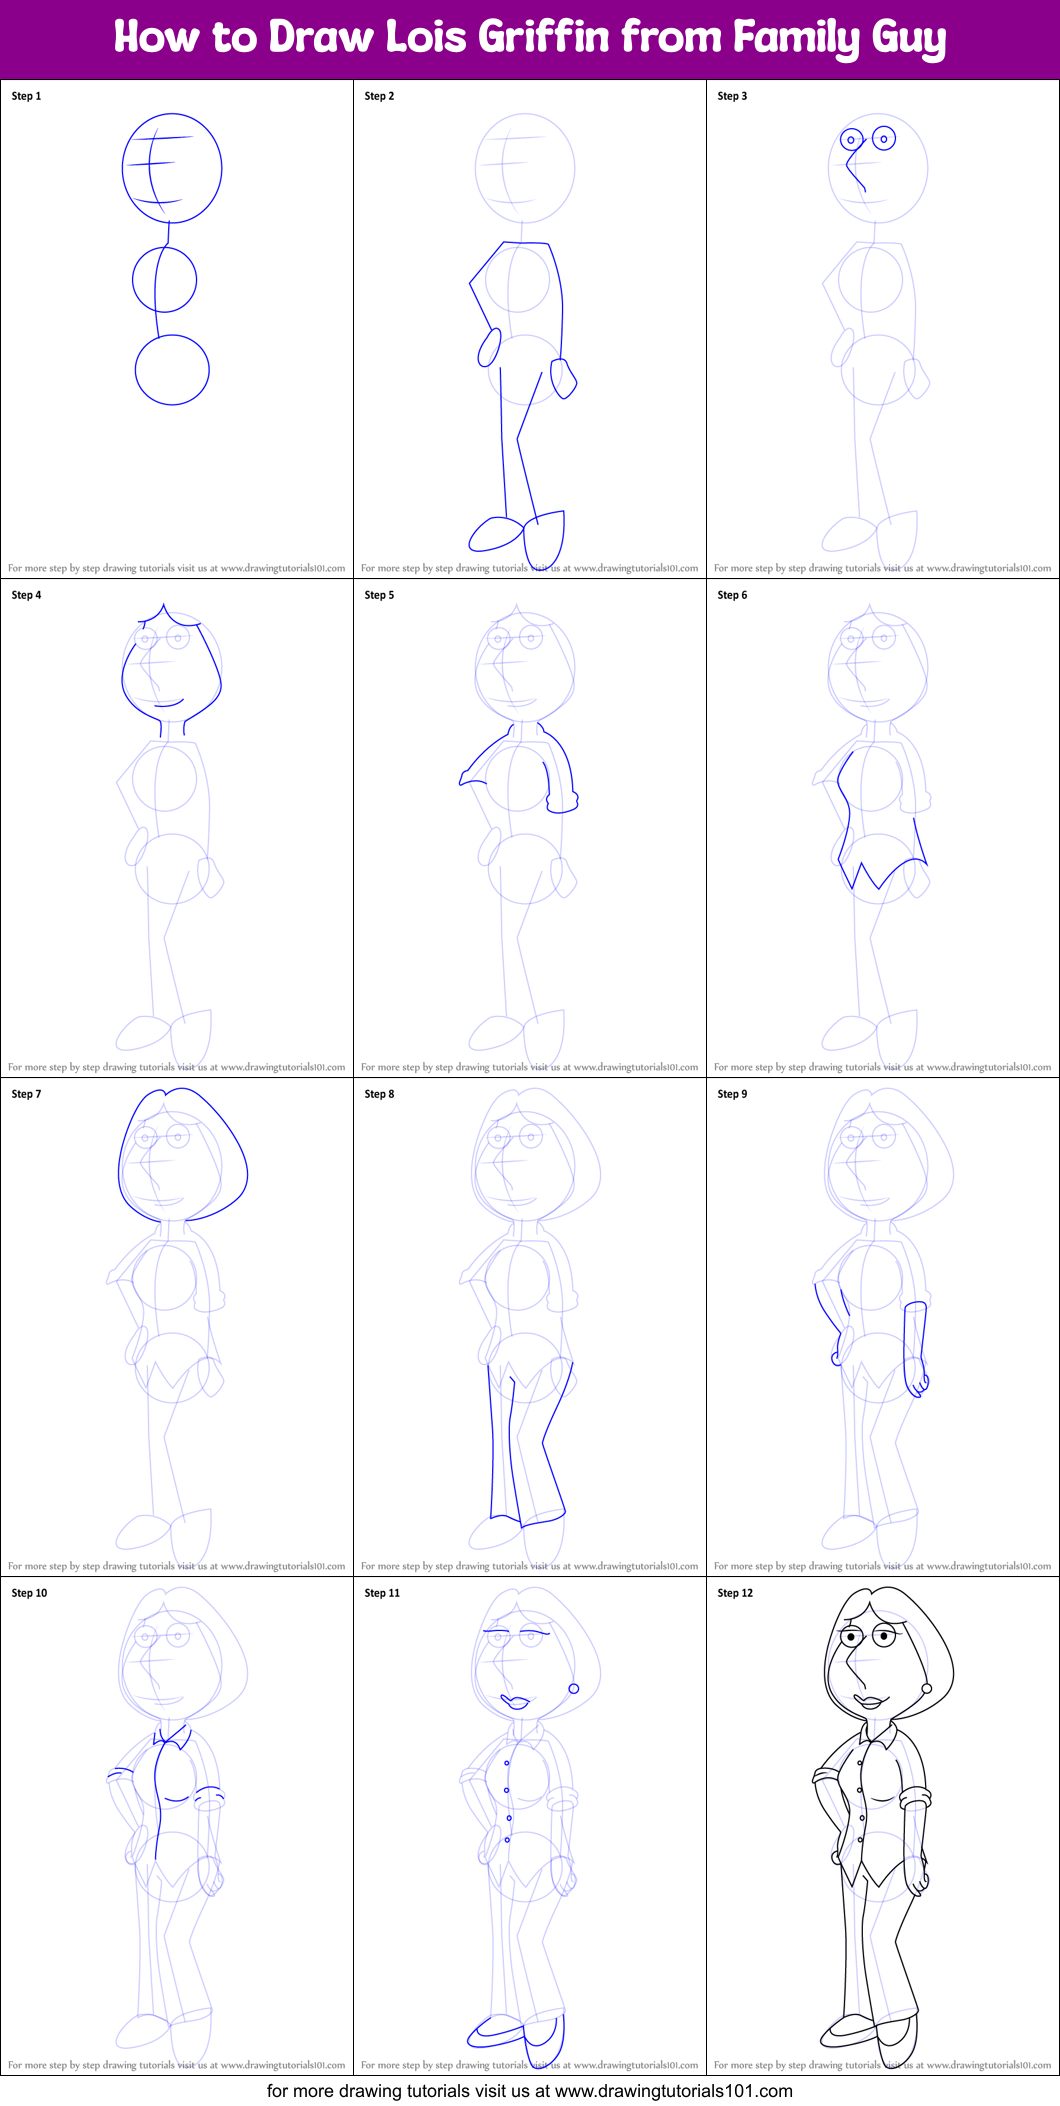 how-to-draw-lois-griffin-from-family-guy-printable-step-by-step-drawing